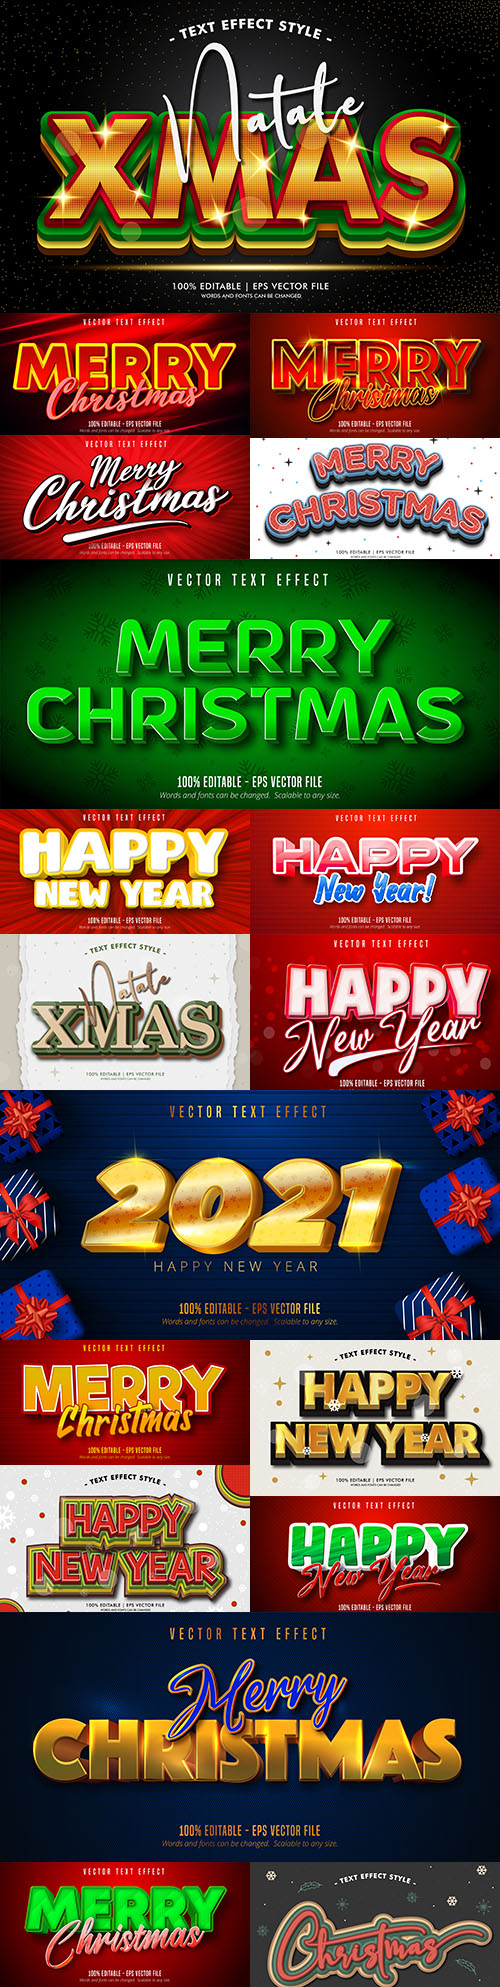 Merry Christmas editable font effect text collection 5
